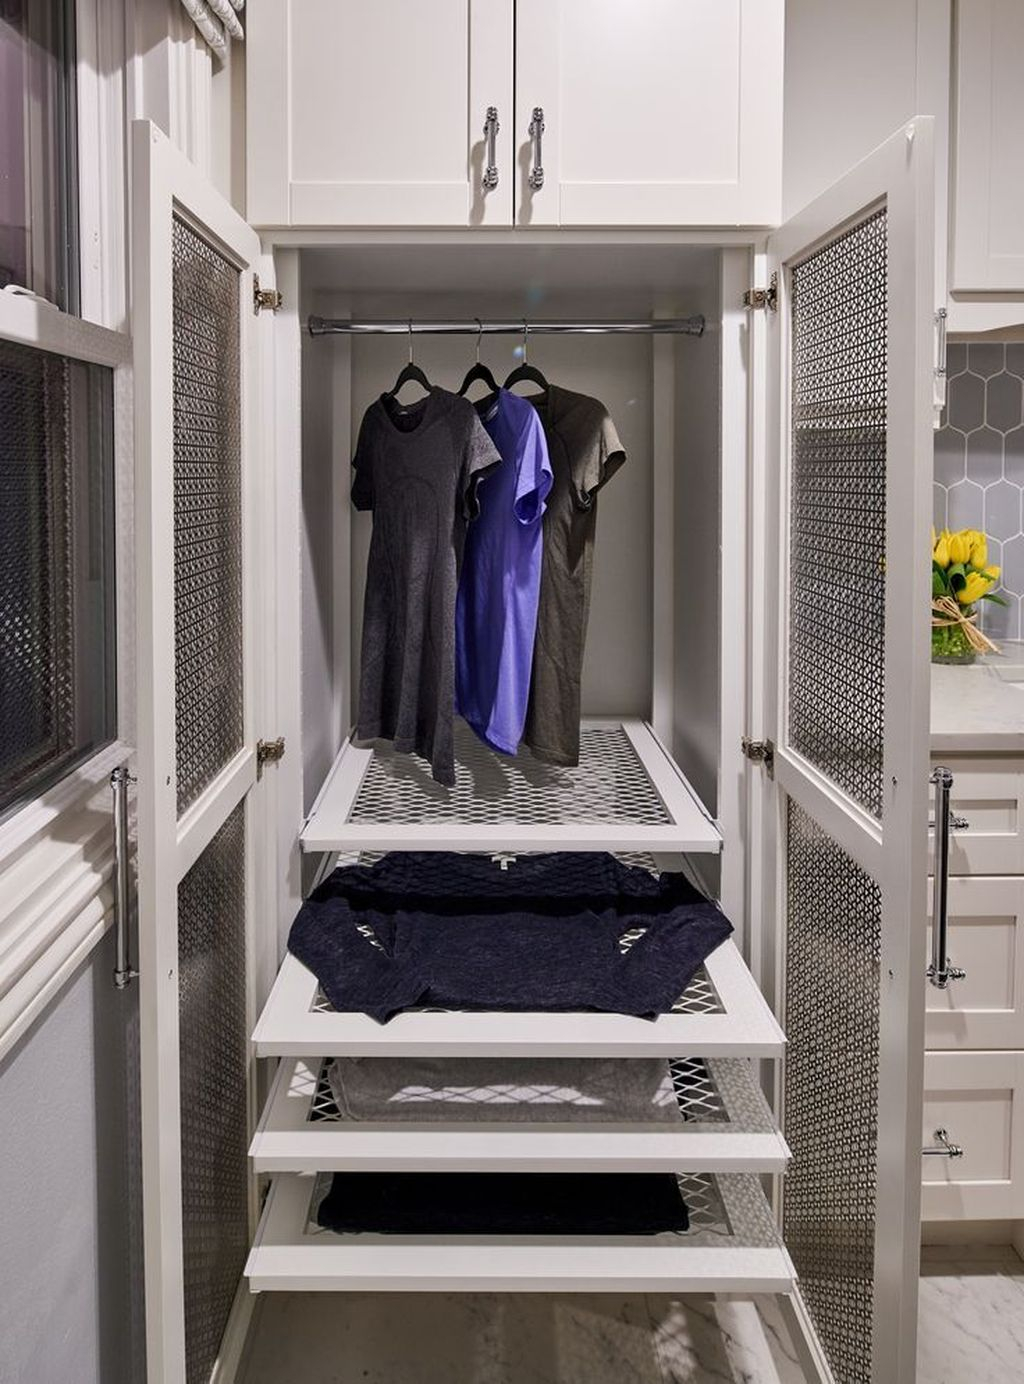 Favored Laundry Room Organization Ideas To Try 06